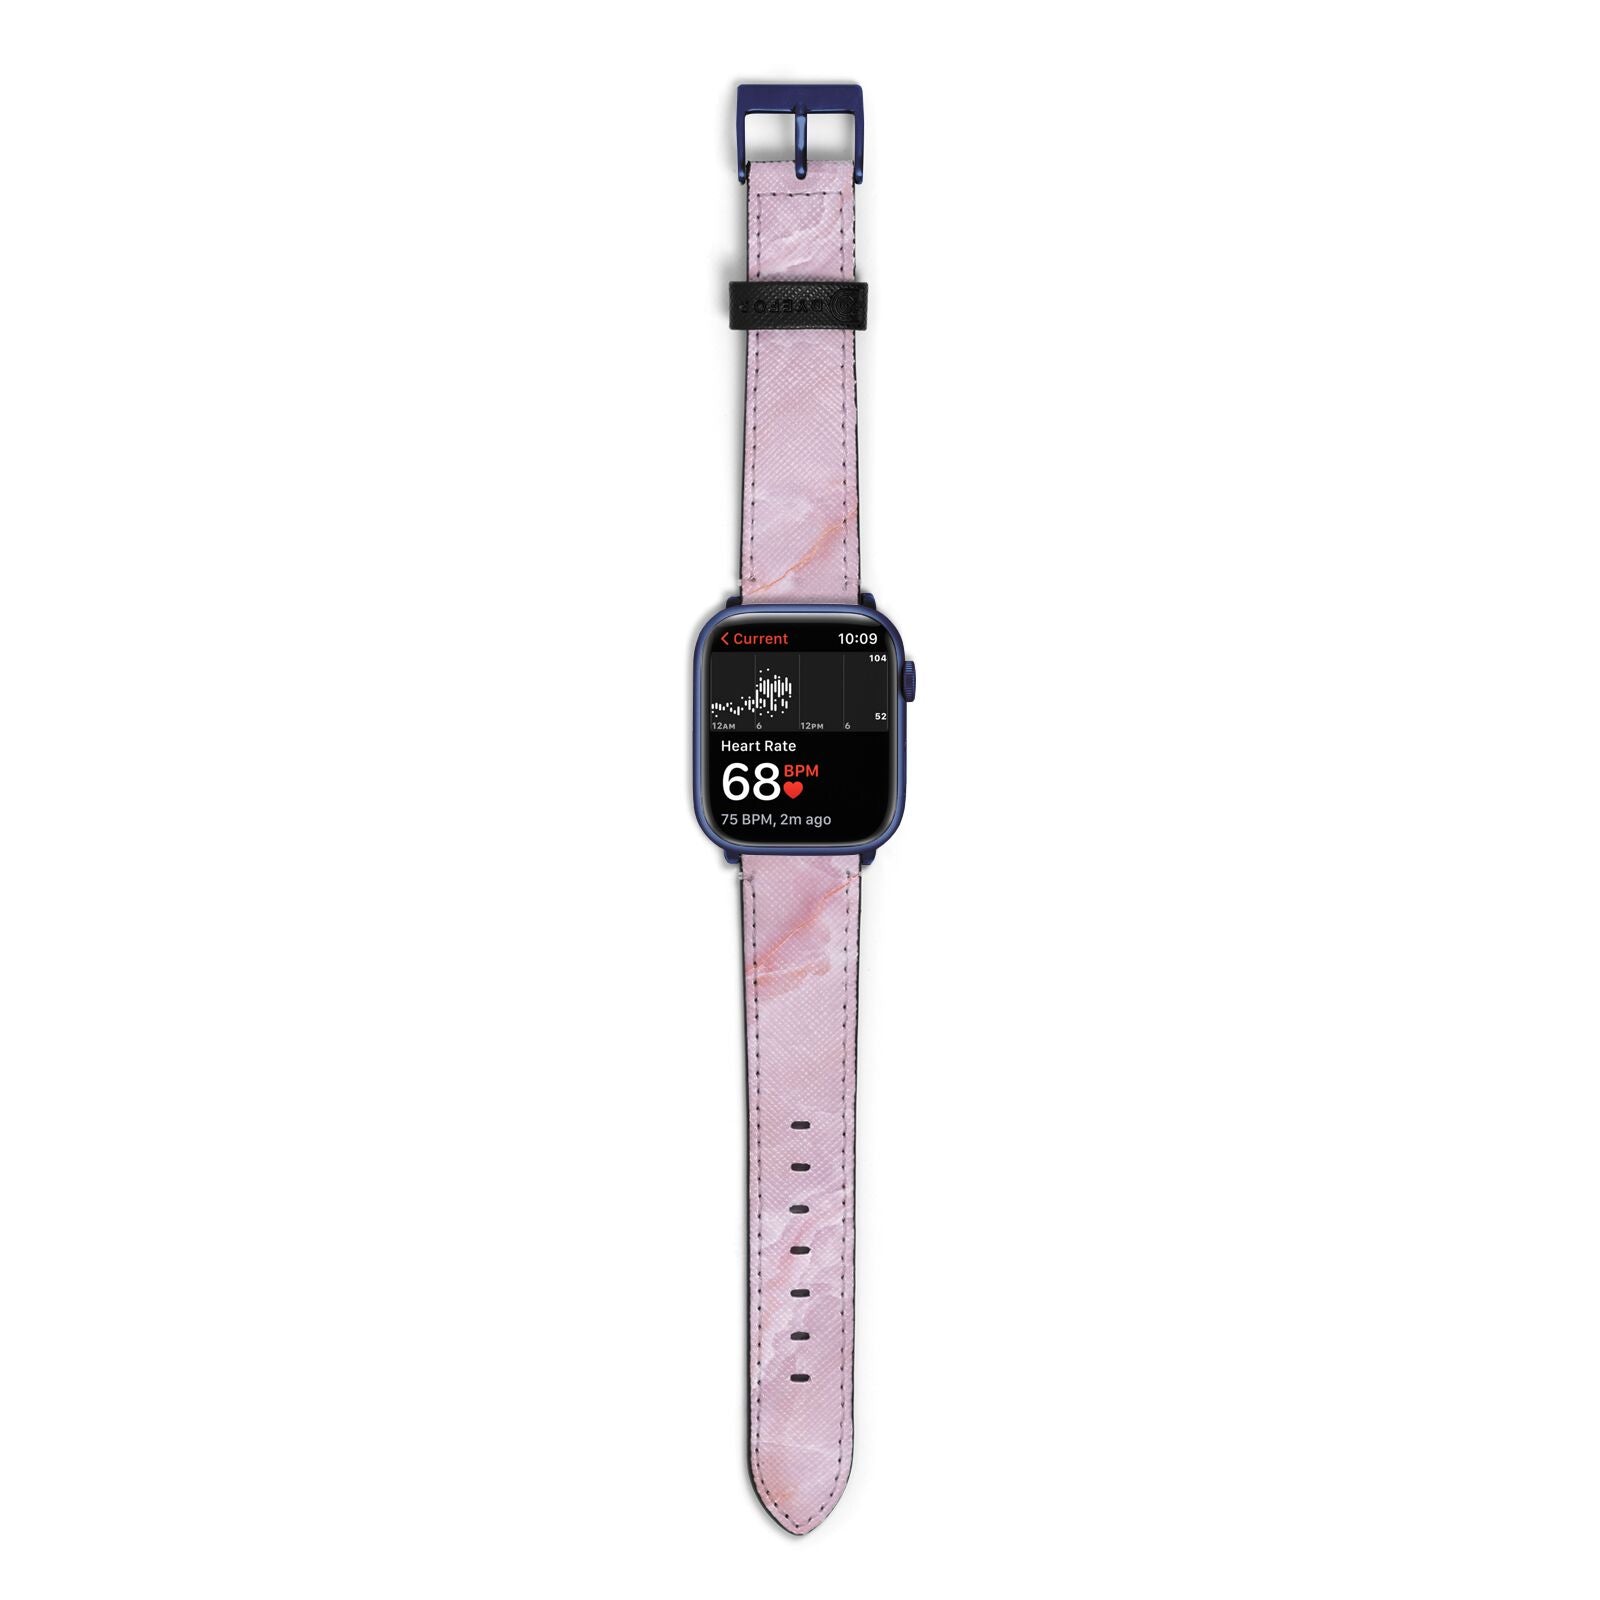 Dreamy Pink Marble Apple Watch Strap Size 38mm with Blue Hardware